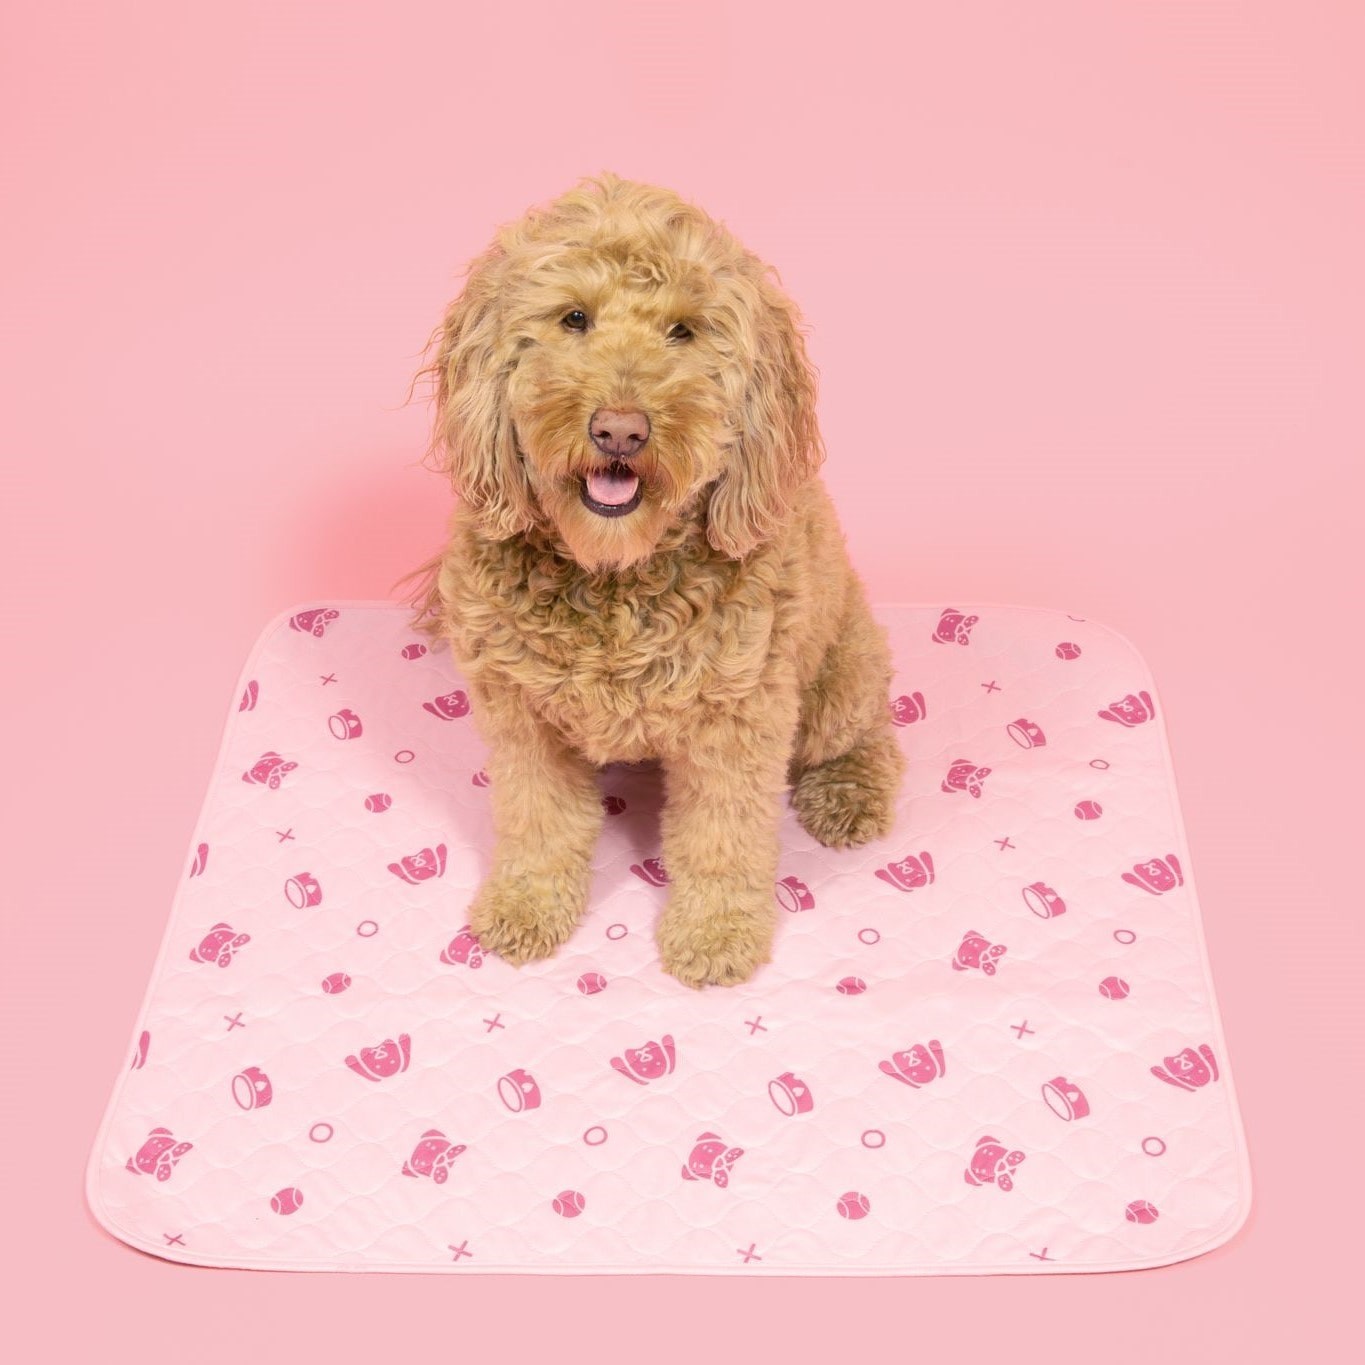 A dog sitting on a pee pad with a pink background